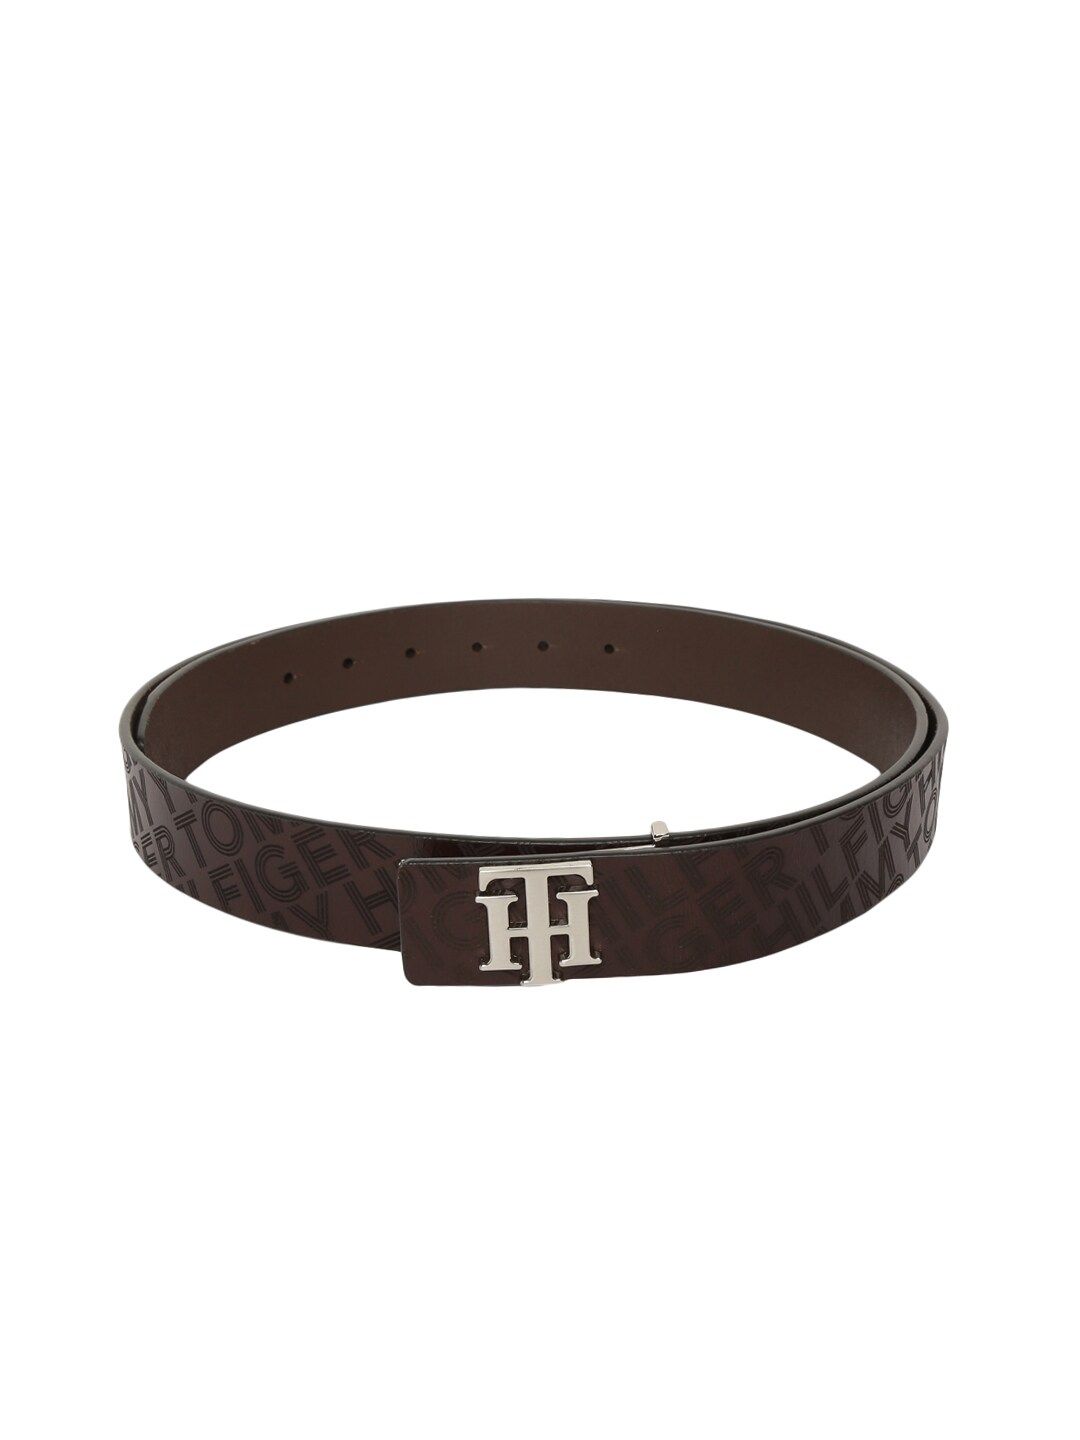 Tommy Hilfiger Unisex Brown Printed Leather Belt Price in India